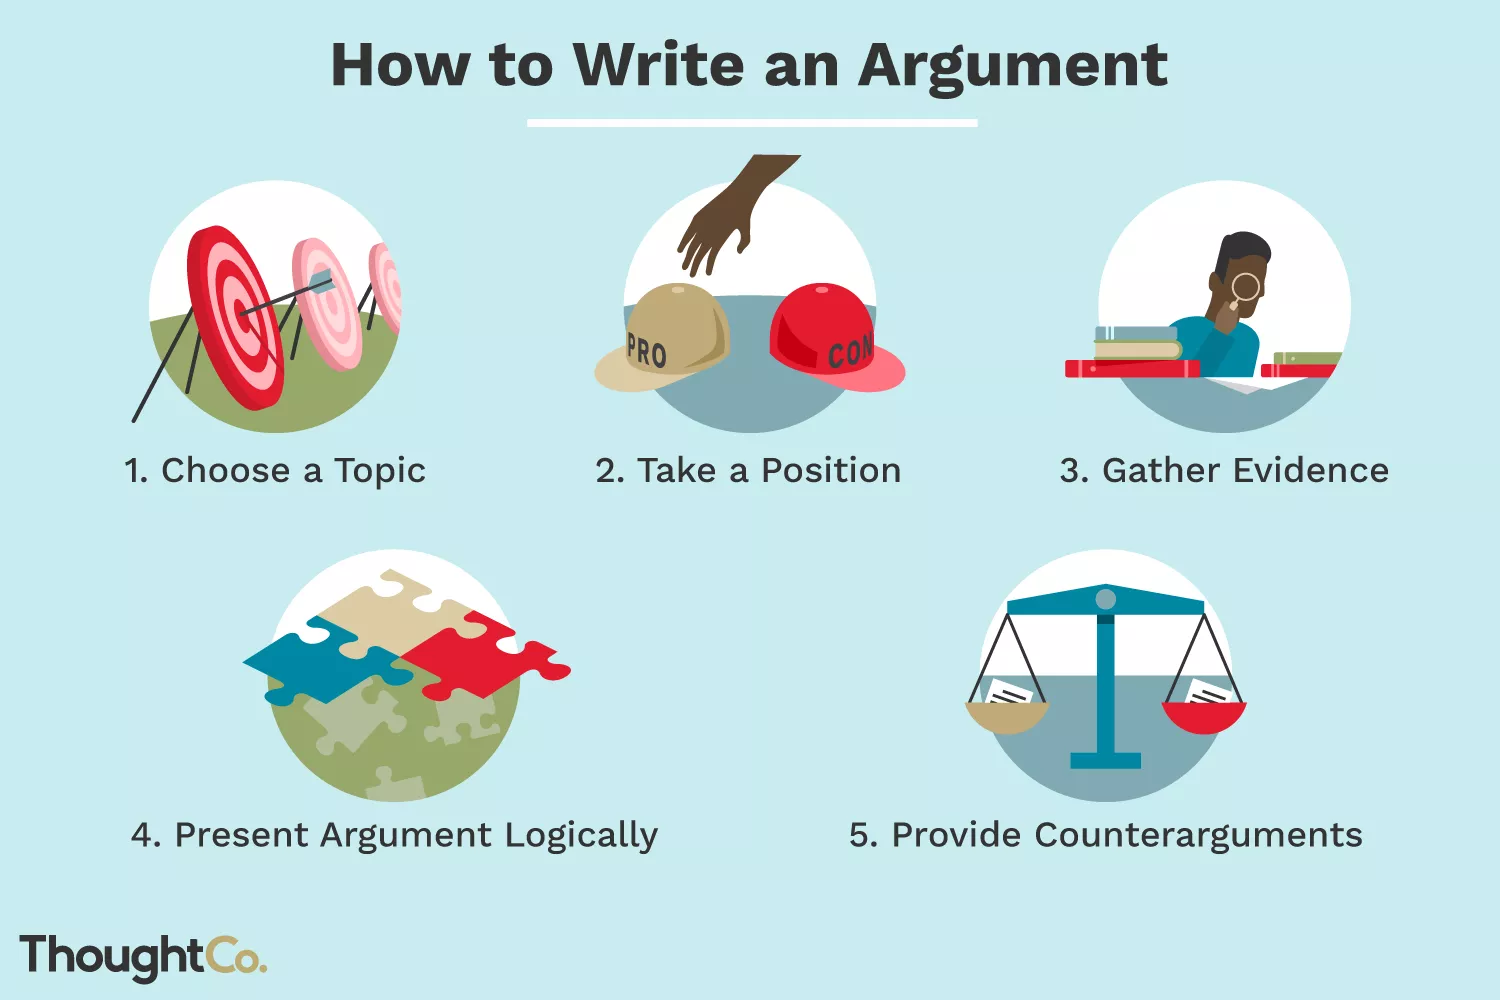 Steps to Write an Argument